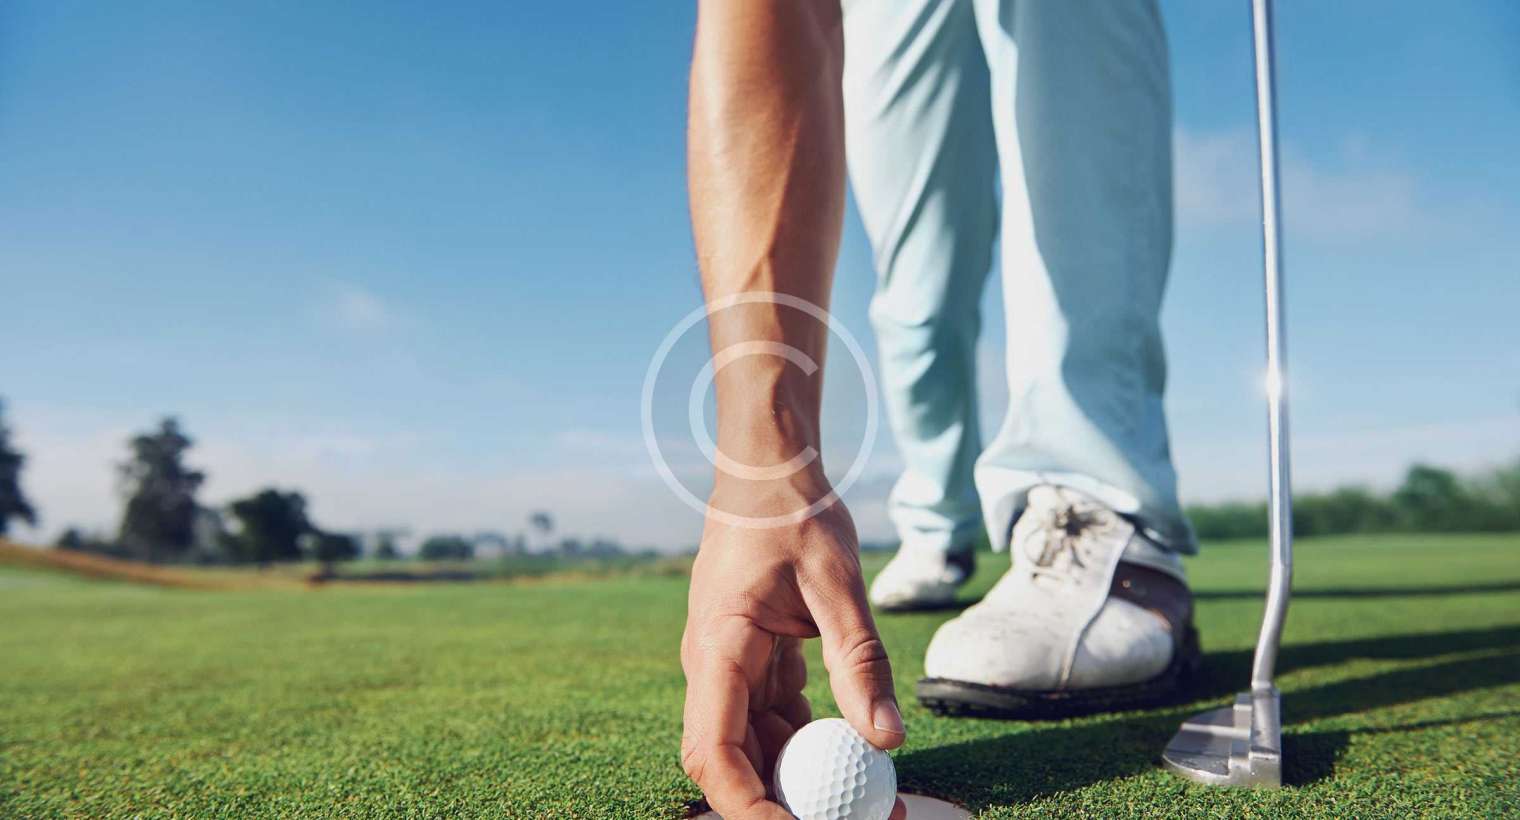 Golf in the Future: What Will It Be Like?